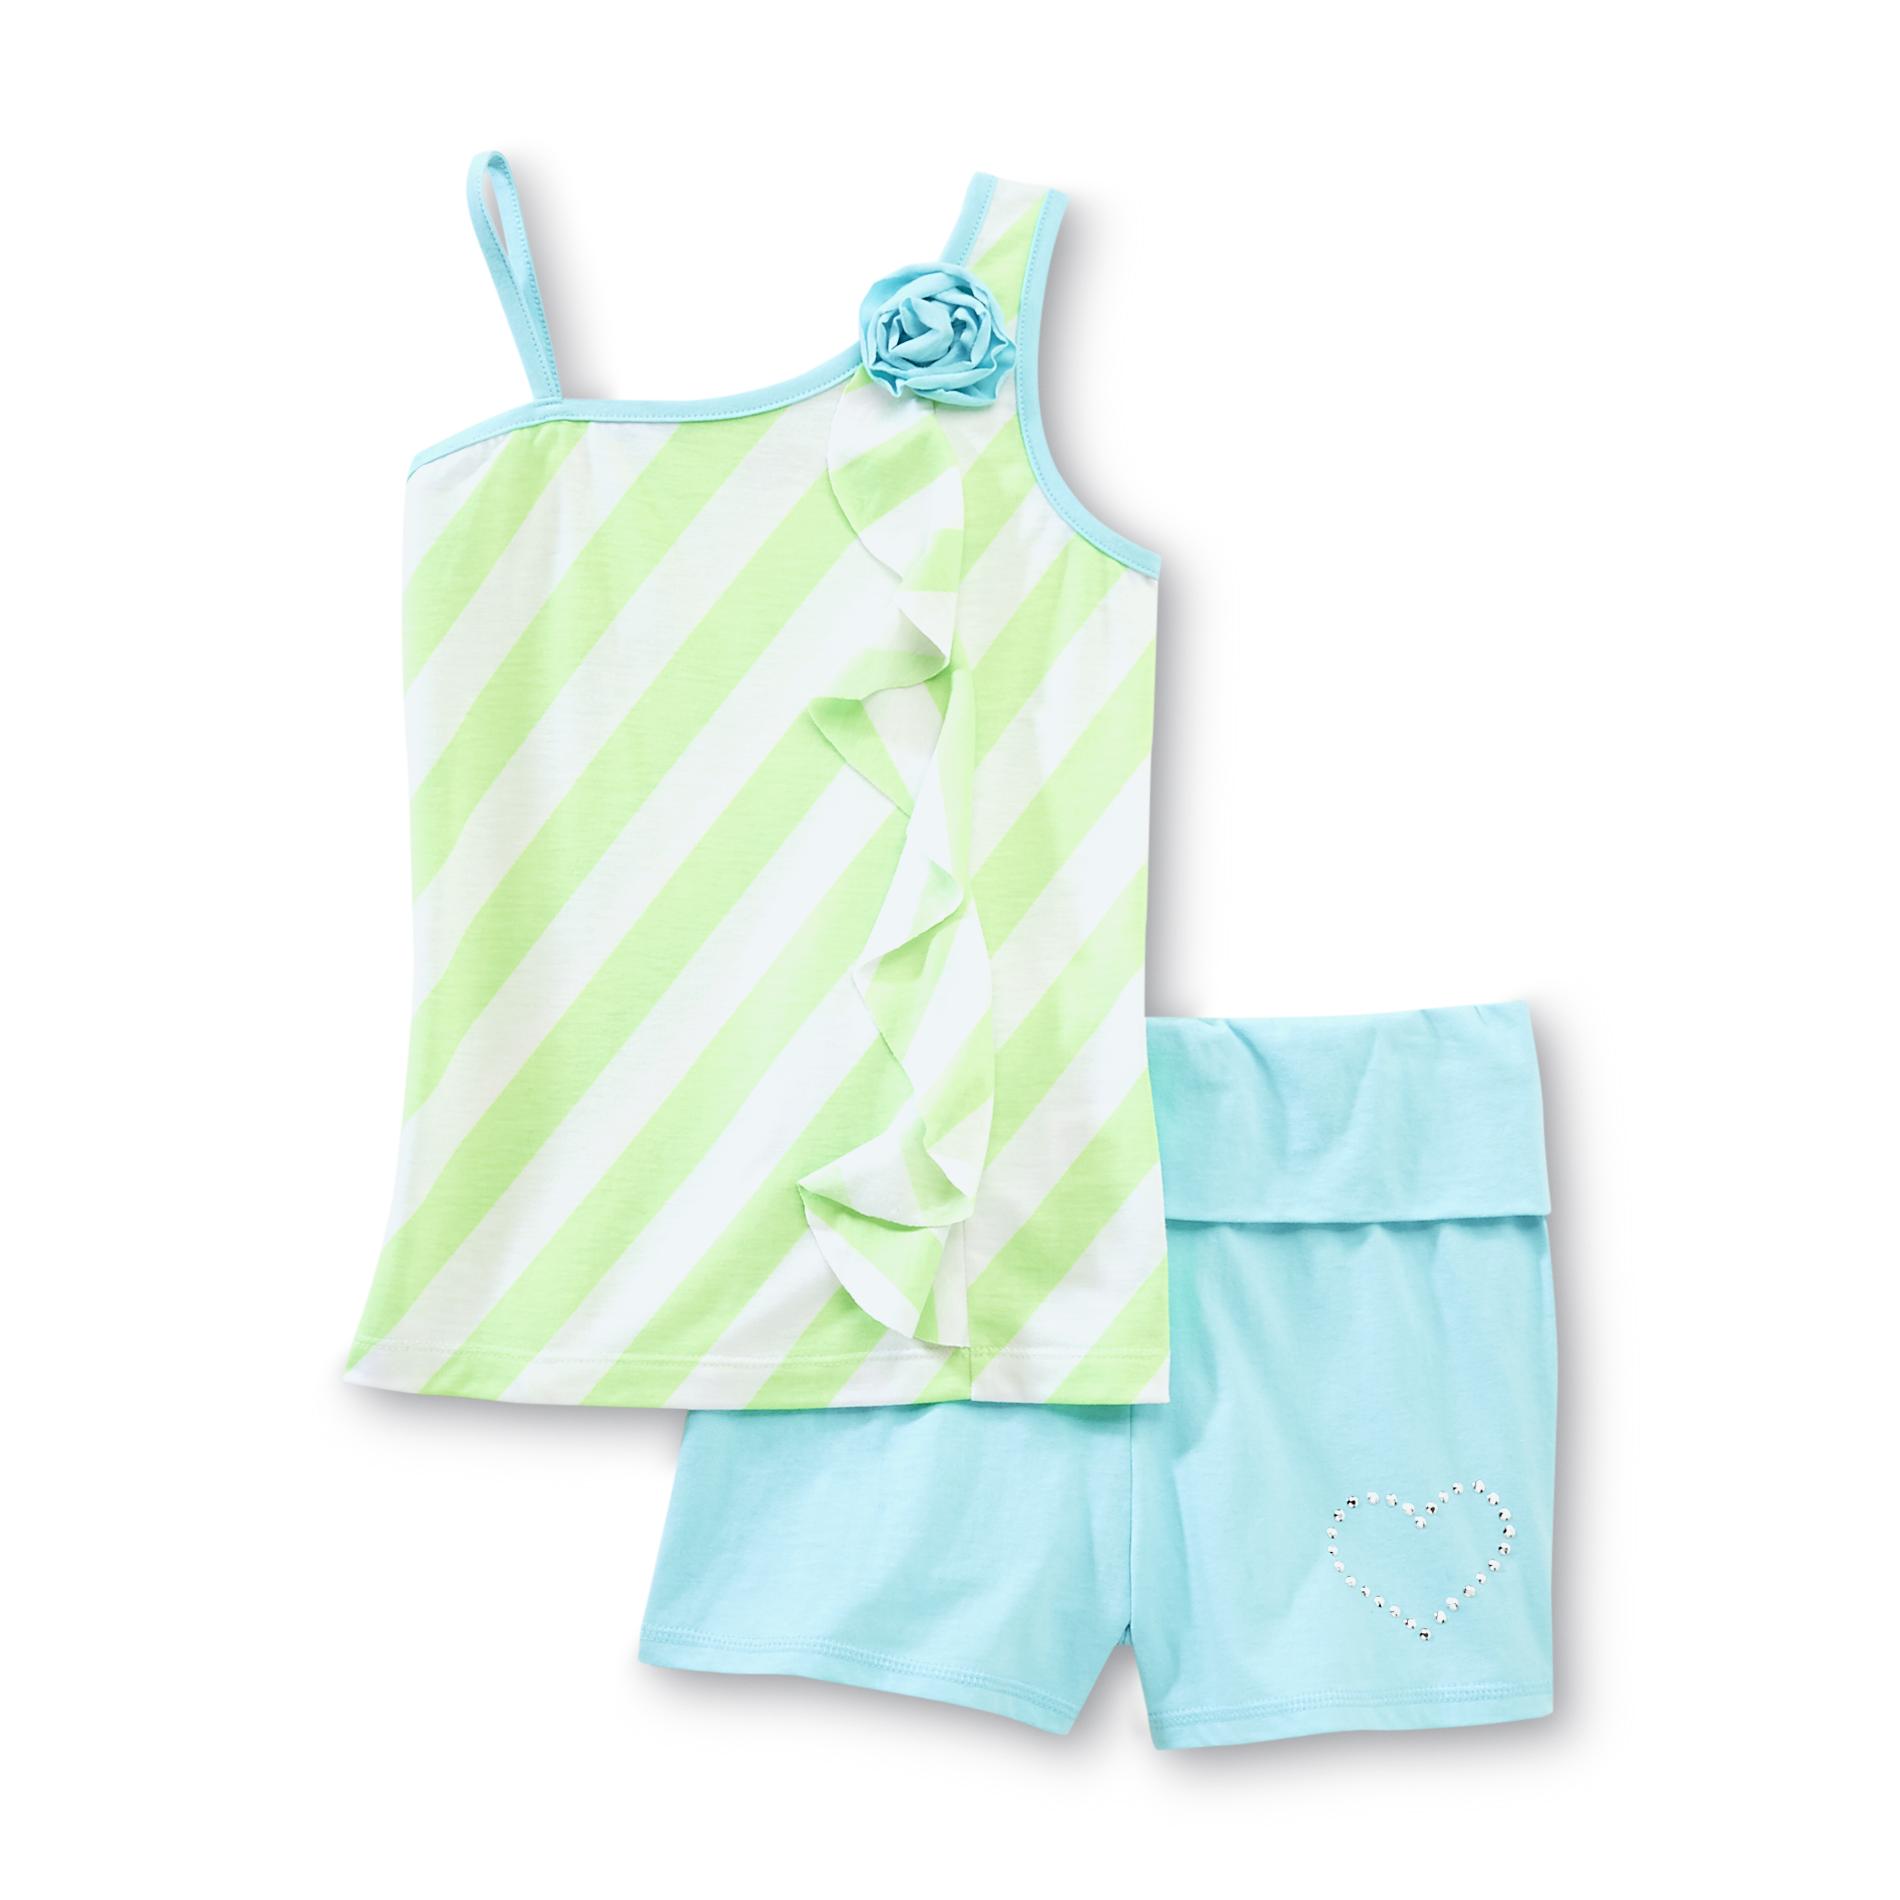 Piper Girl's One-Shoulder Top & Shorts - Striped & Heart